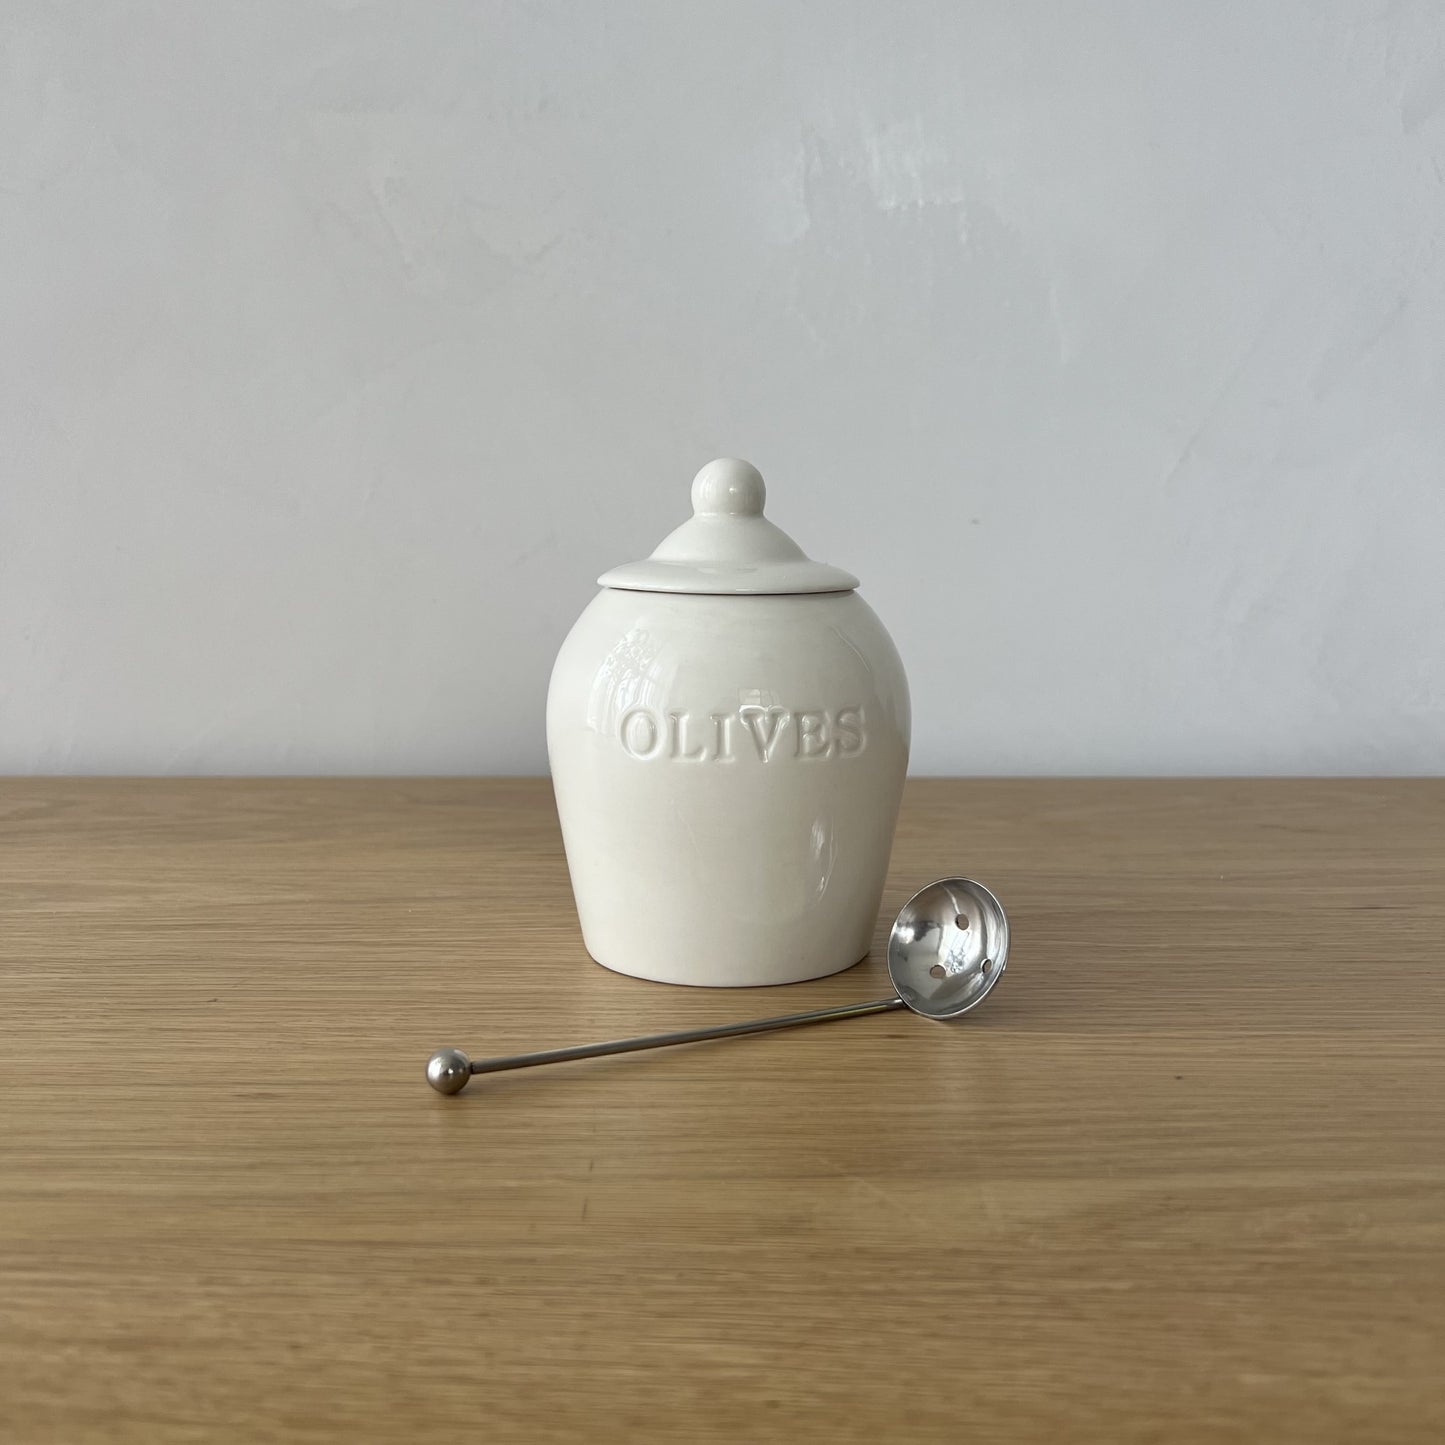 Olive Jar with Stainless Steel Spoon